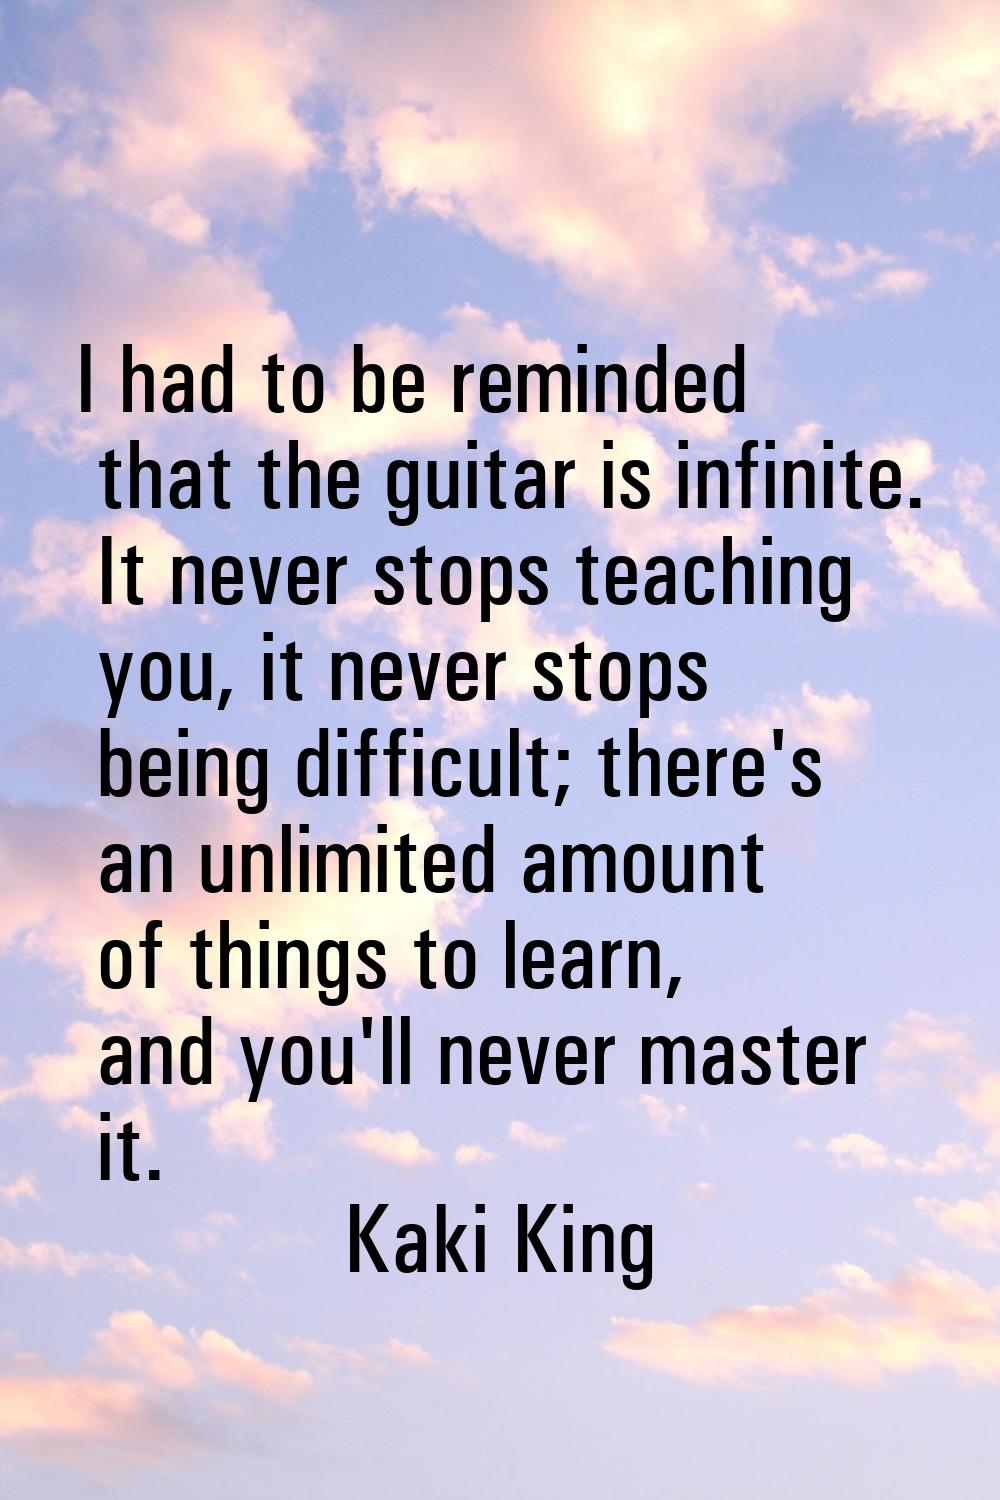 I had to be reminded that the guitar is infinite. It never stops teaching you, it never stops being